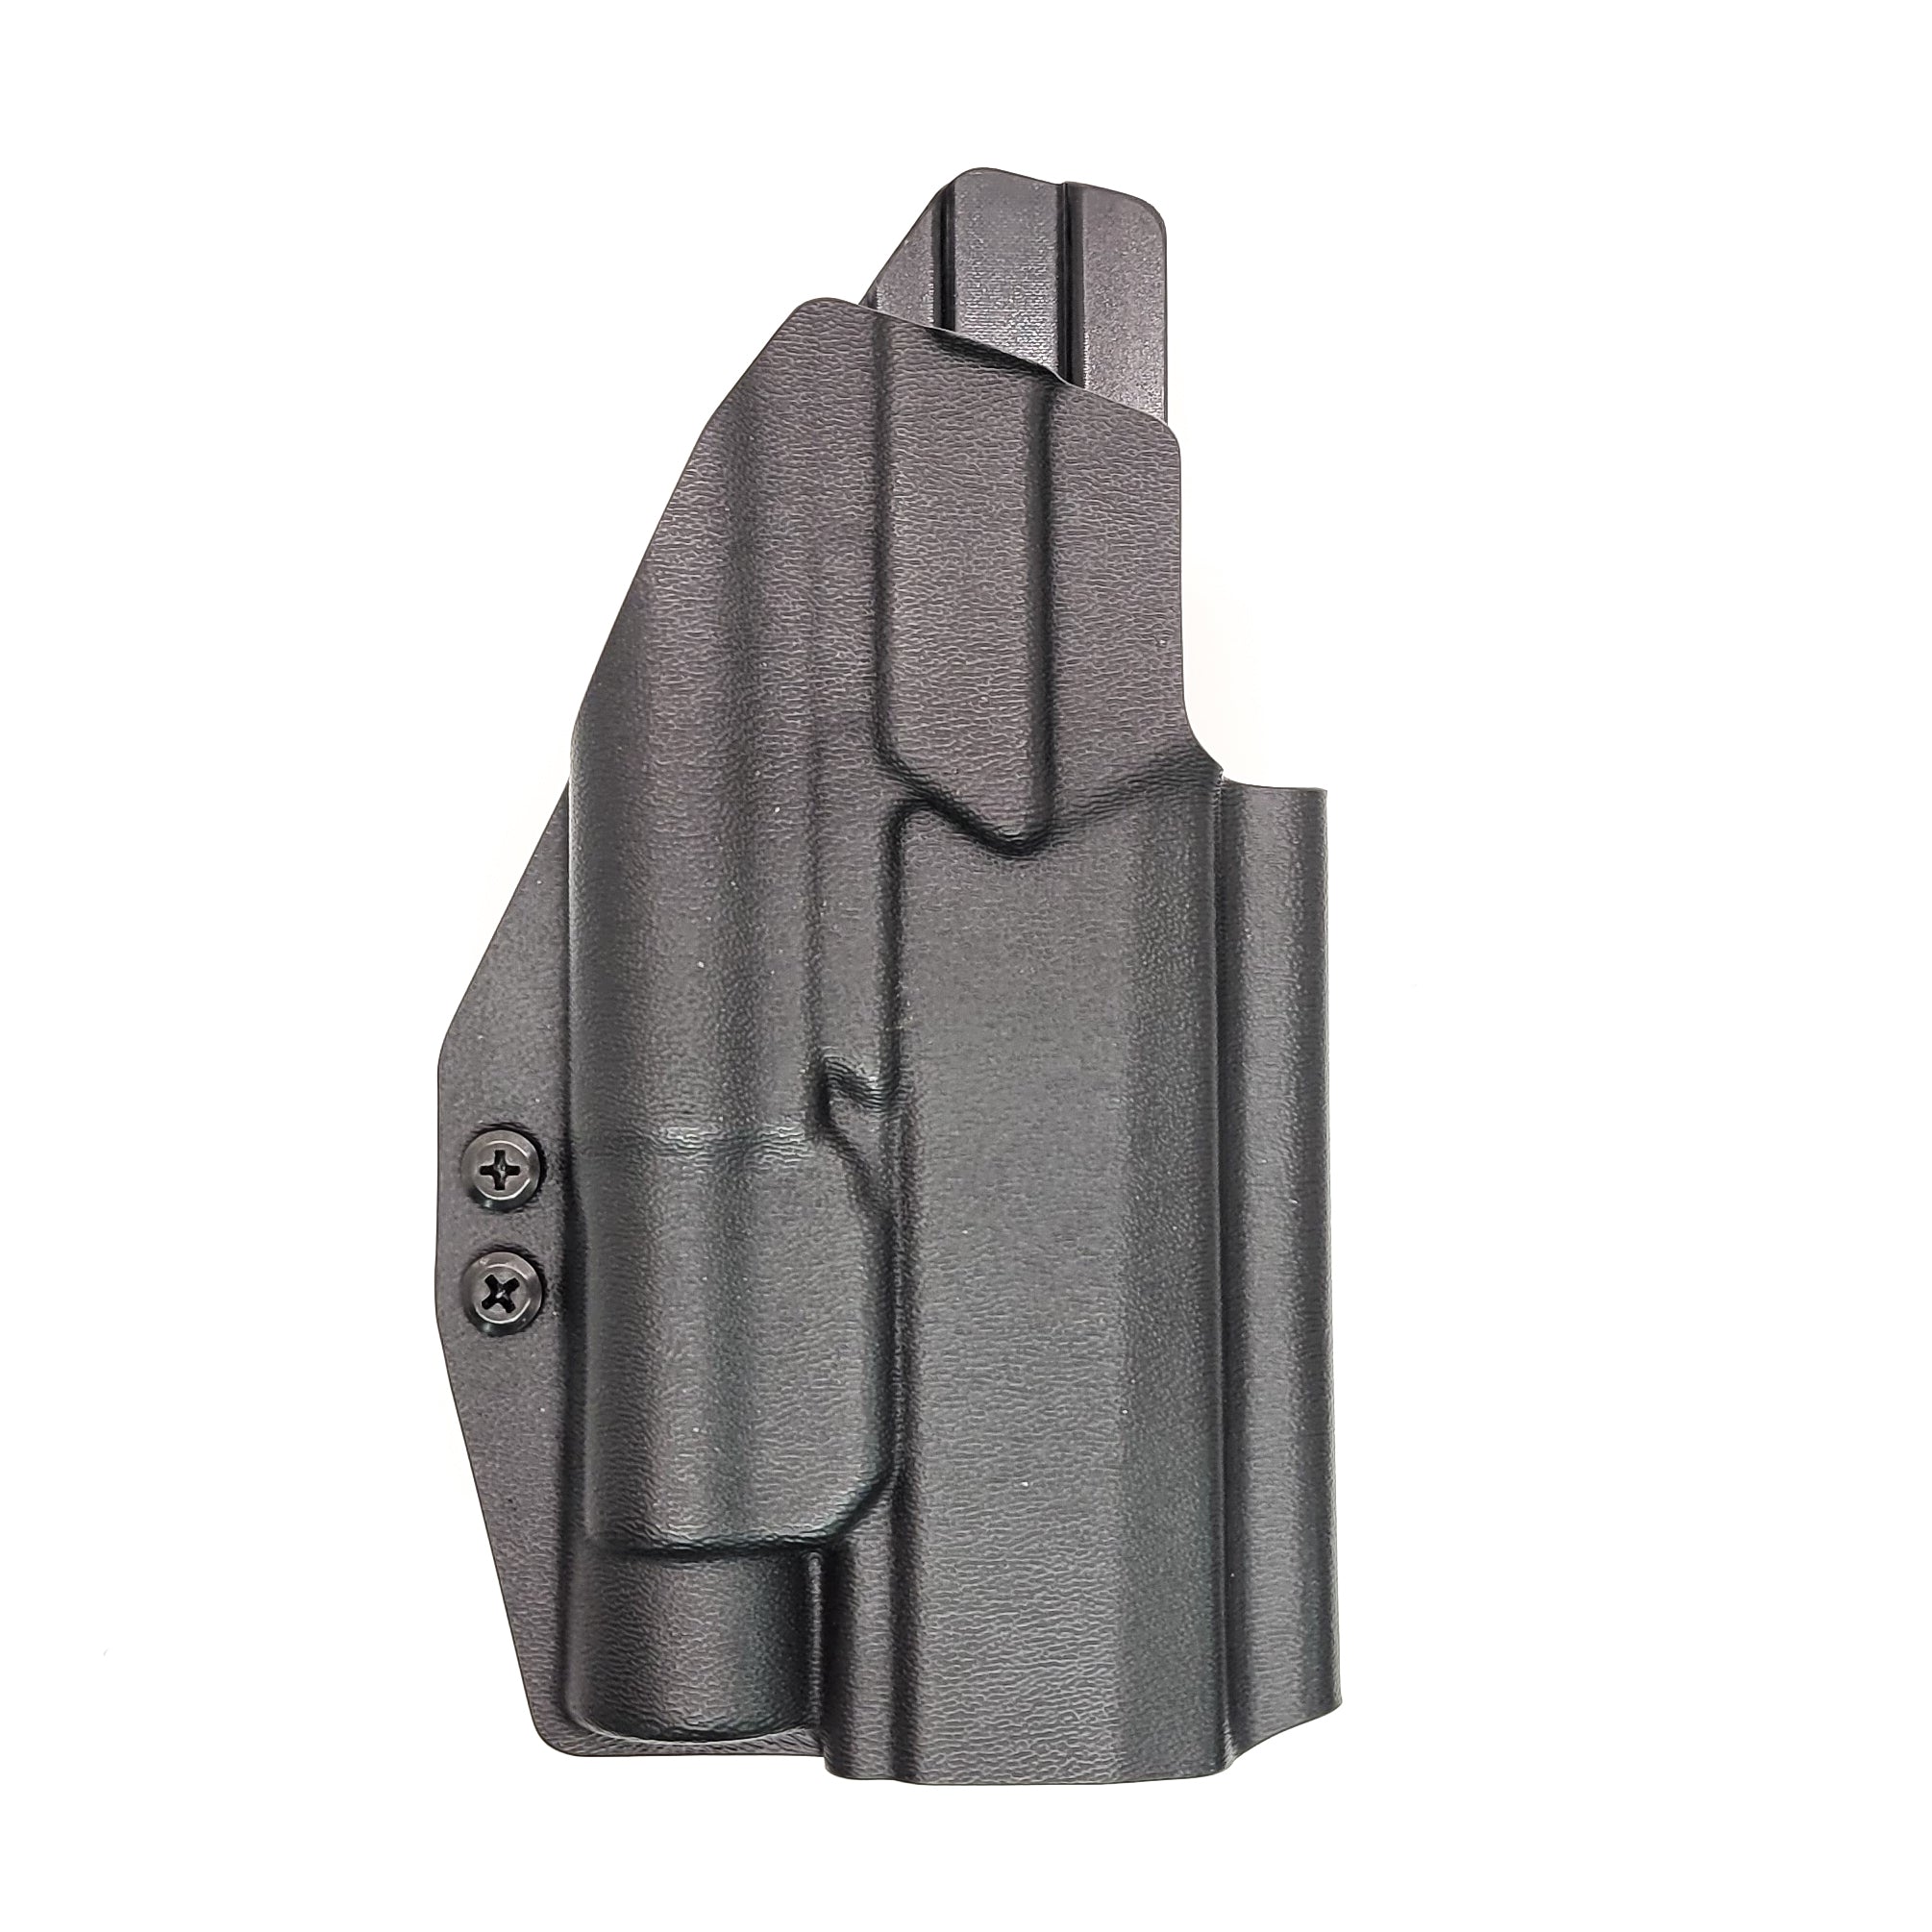 For the best OWB Outside Waistband Holster designed to fit the Sig Sauer P320 AXG & AXG Pro pistols with the Streamlight TLR-1 or TLR-1 HL light, look no further than Four Brothers. This holster will hold the Full Size, Carry, M18, M17, X-Five, and X-Five Legion with a TLR-1HL light. Open Muzzle Adjustable Retention